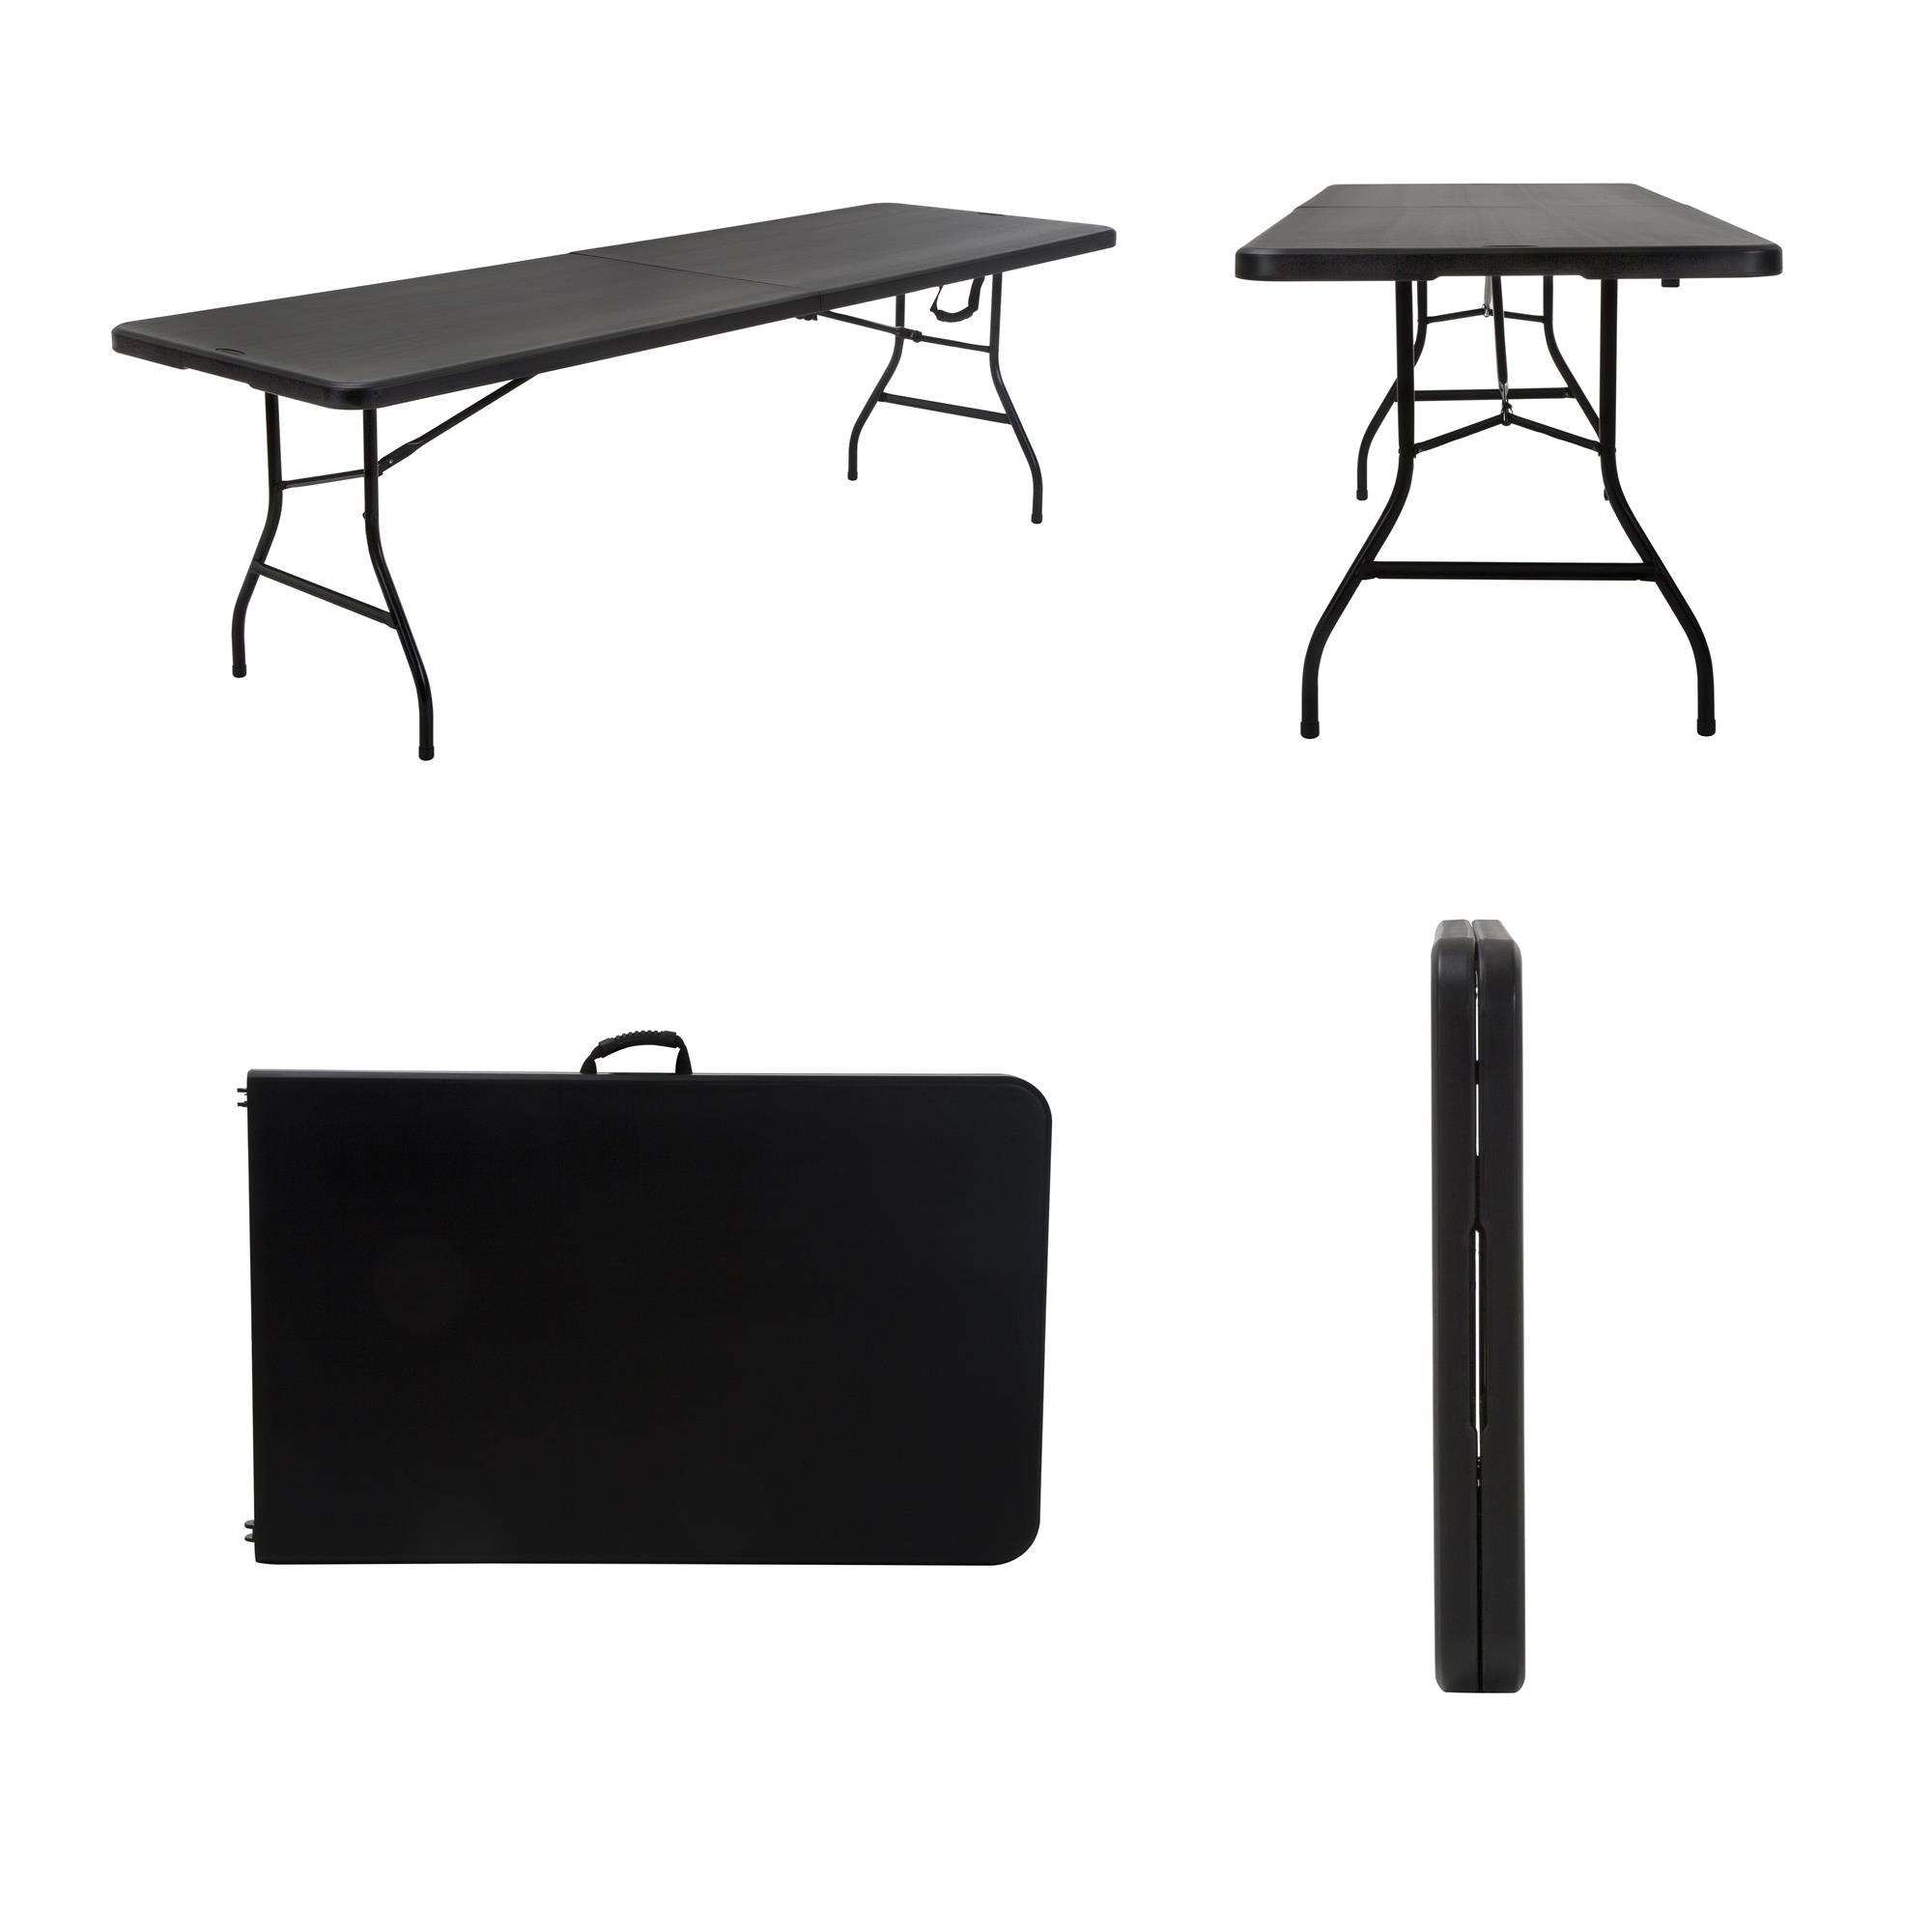 Deluxe 8 foot x 30 inch Fold-in-Half Blow Molded Table - Black - 8’ FIH